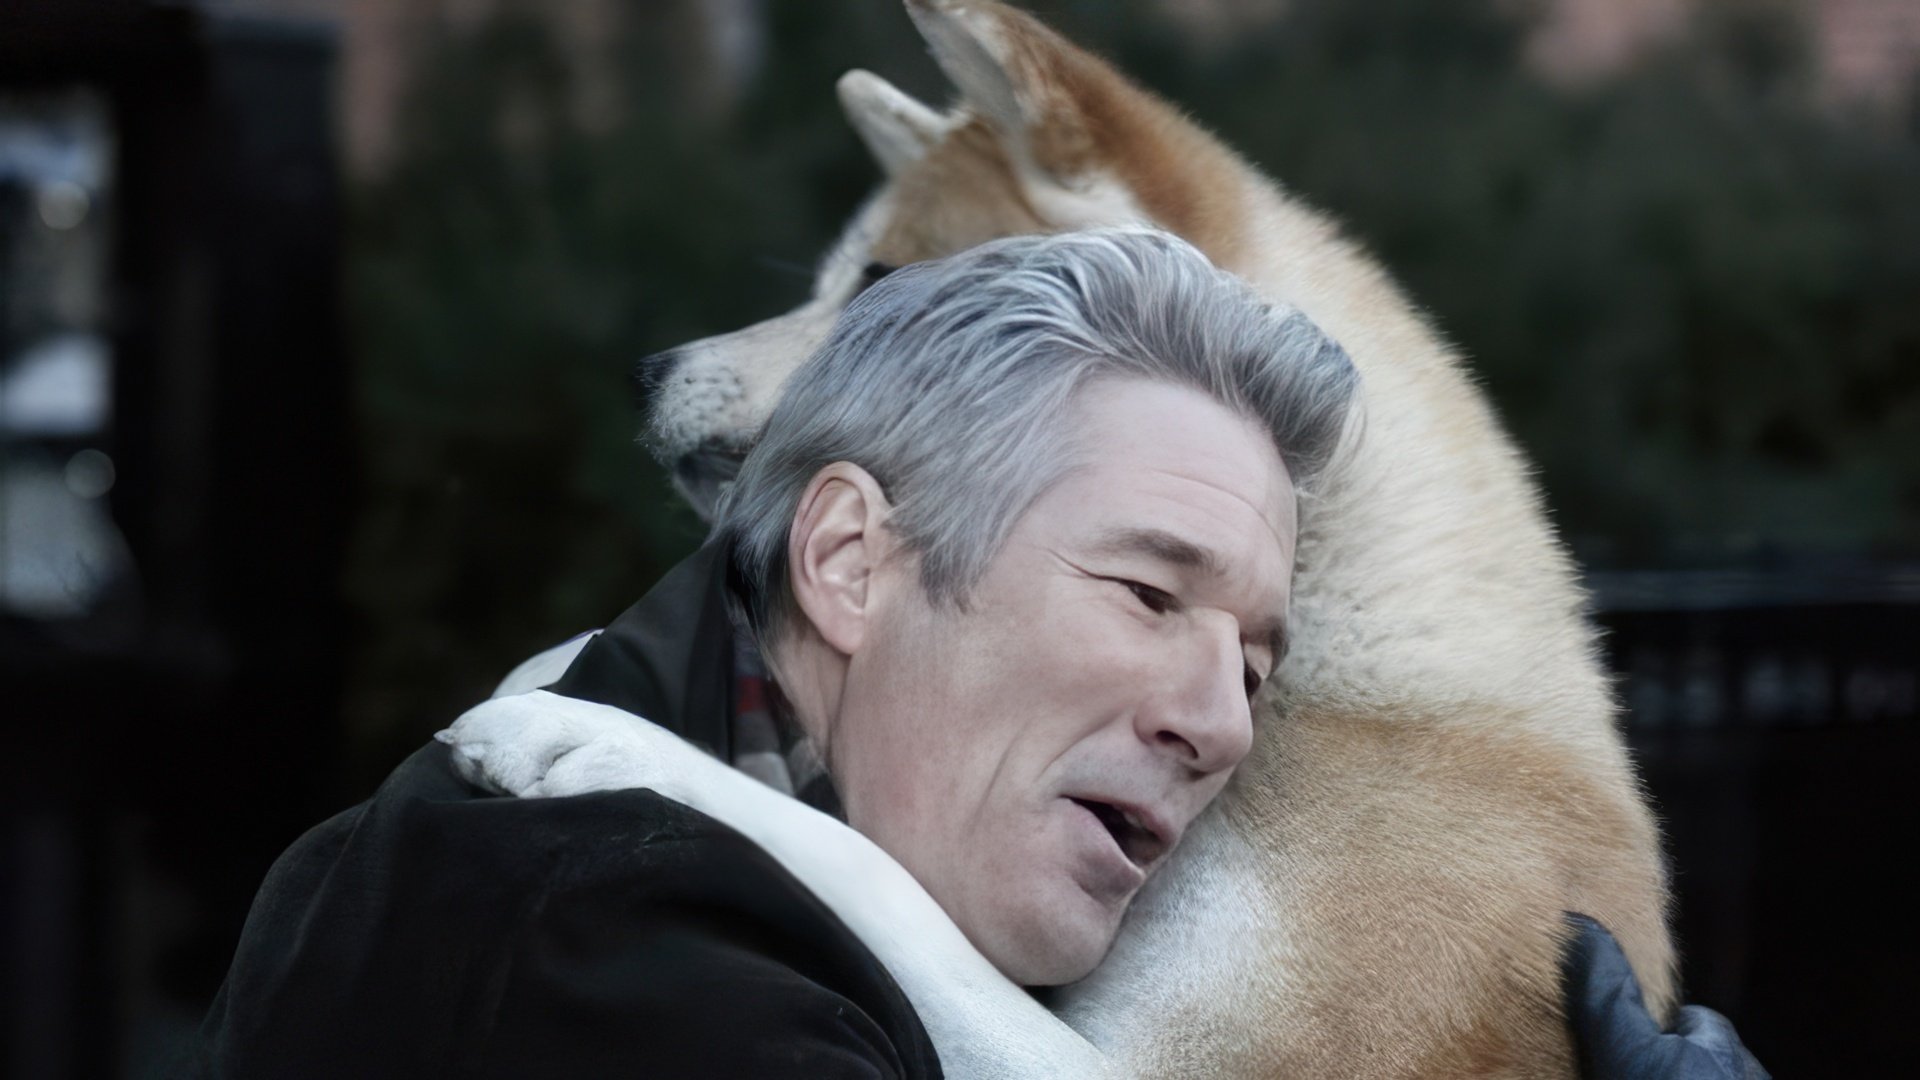 A shot from the Hachi: A Dog’s Tale